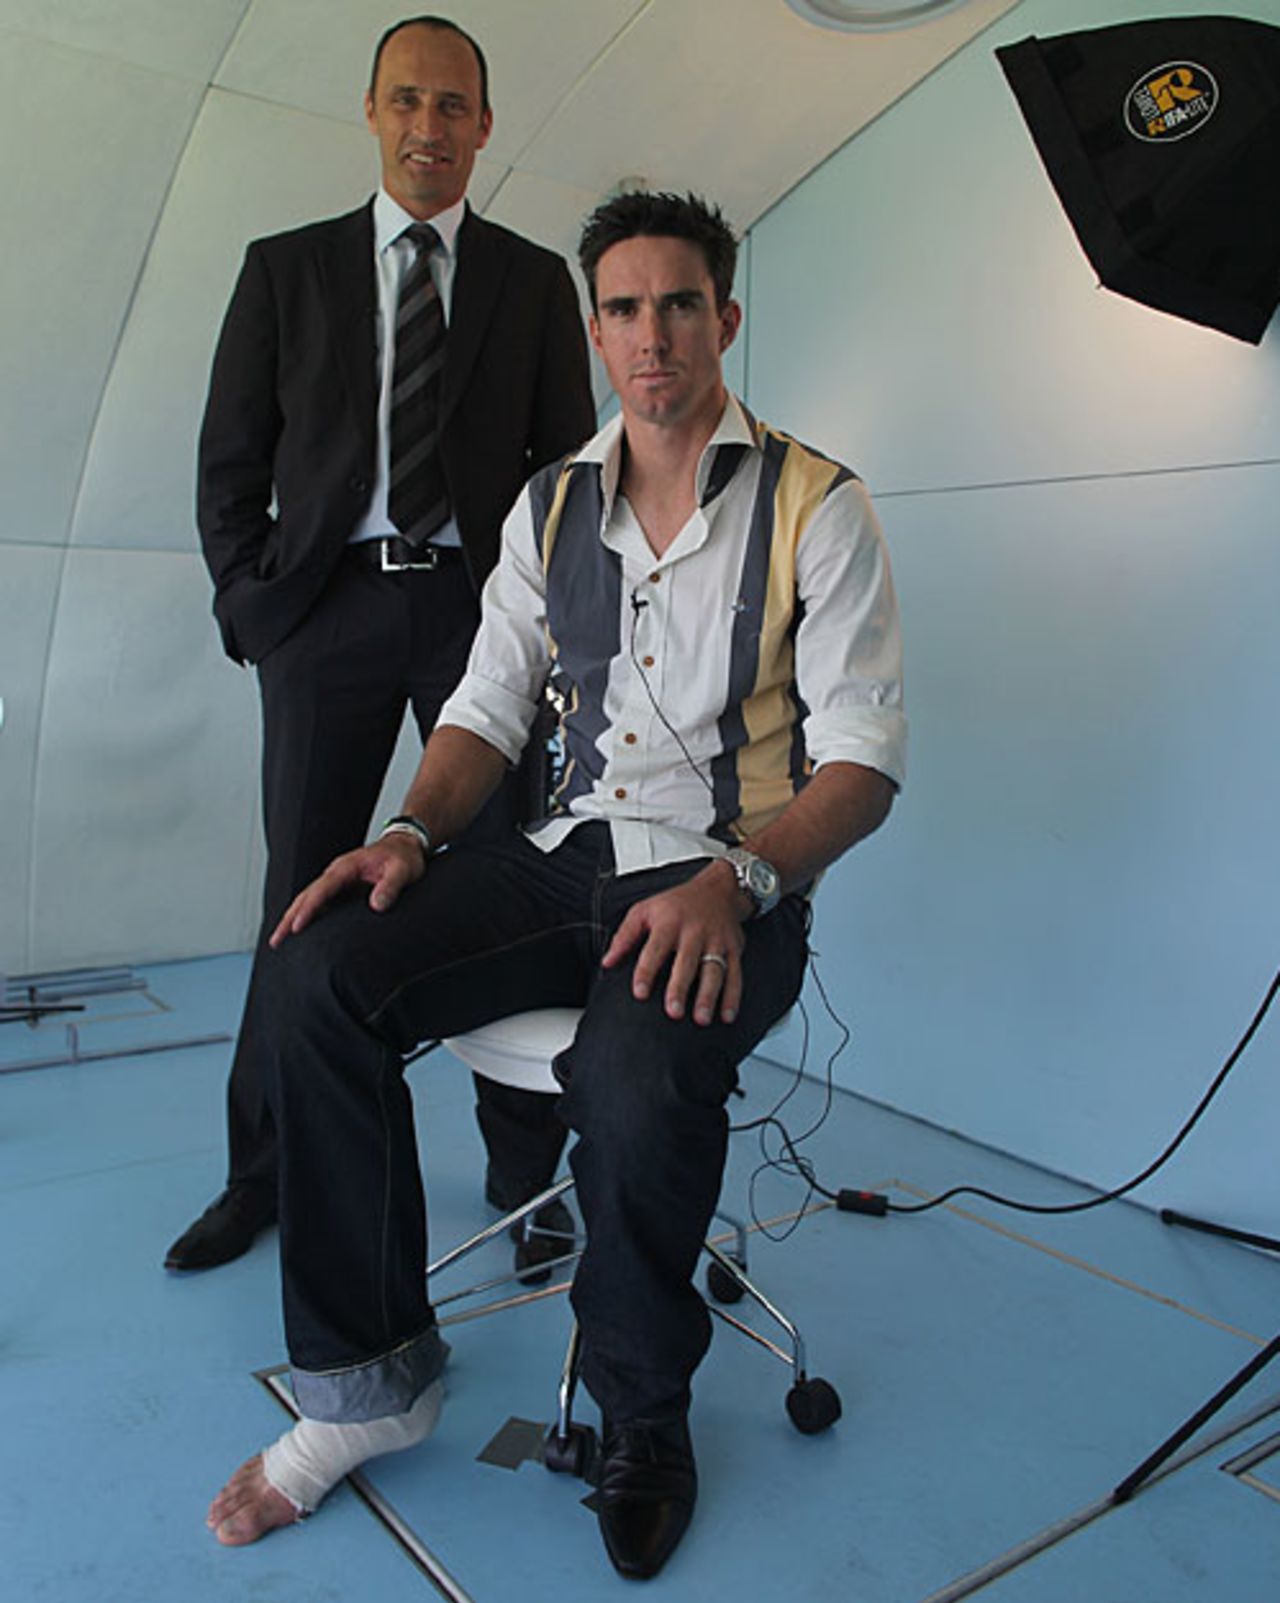 Nasser Hussain and Kevin Pietersen at an interview, Lord's, July 25, 2009